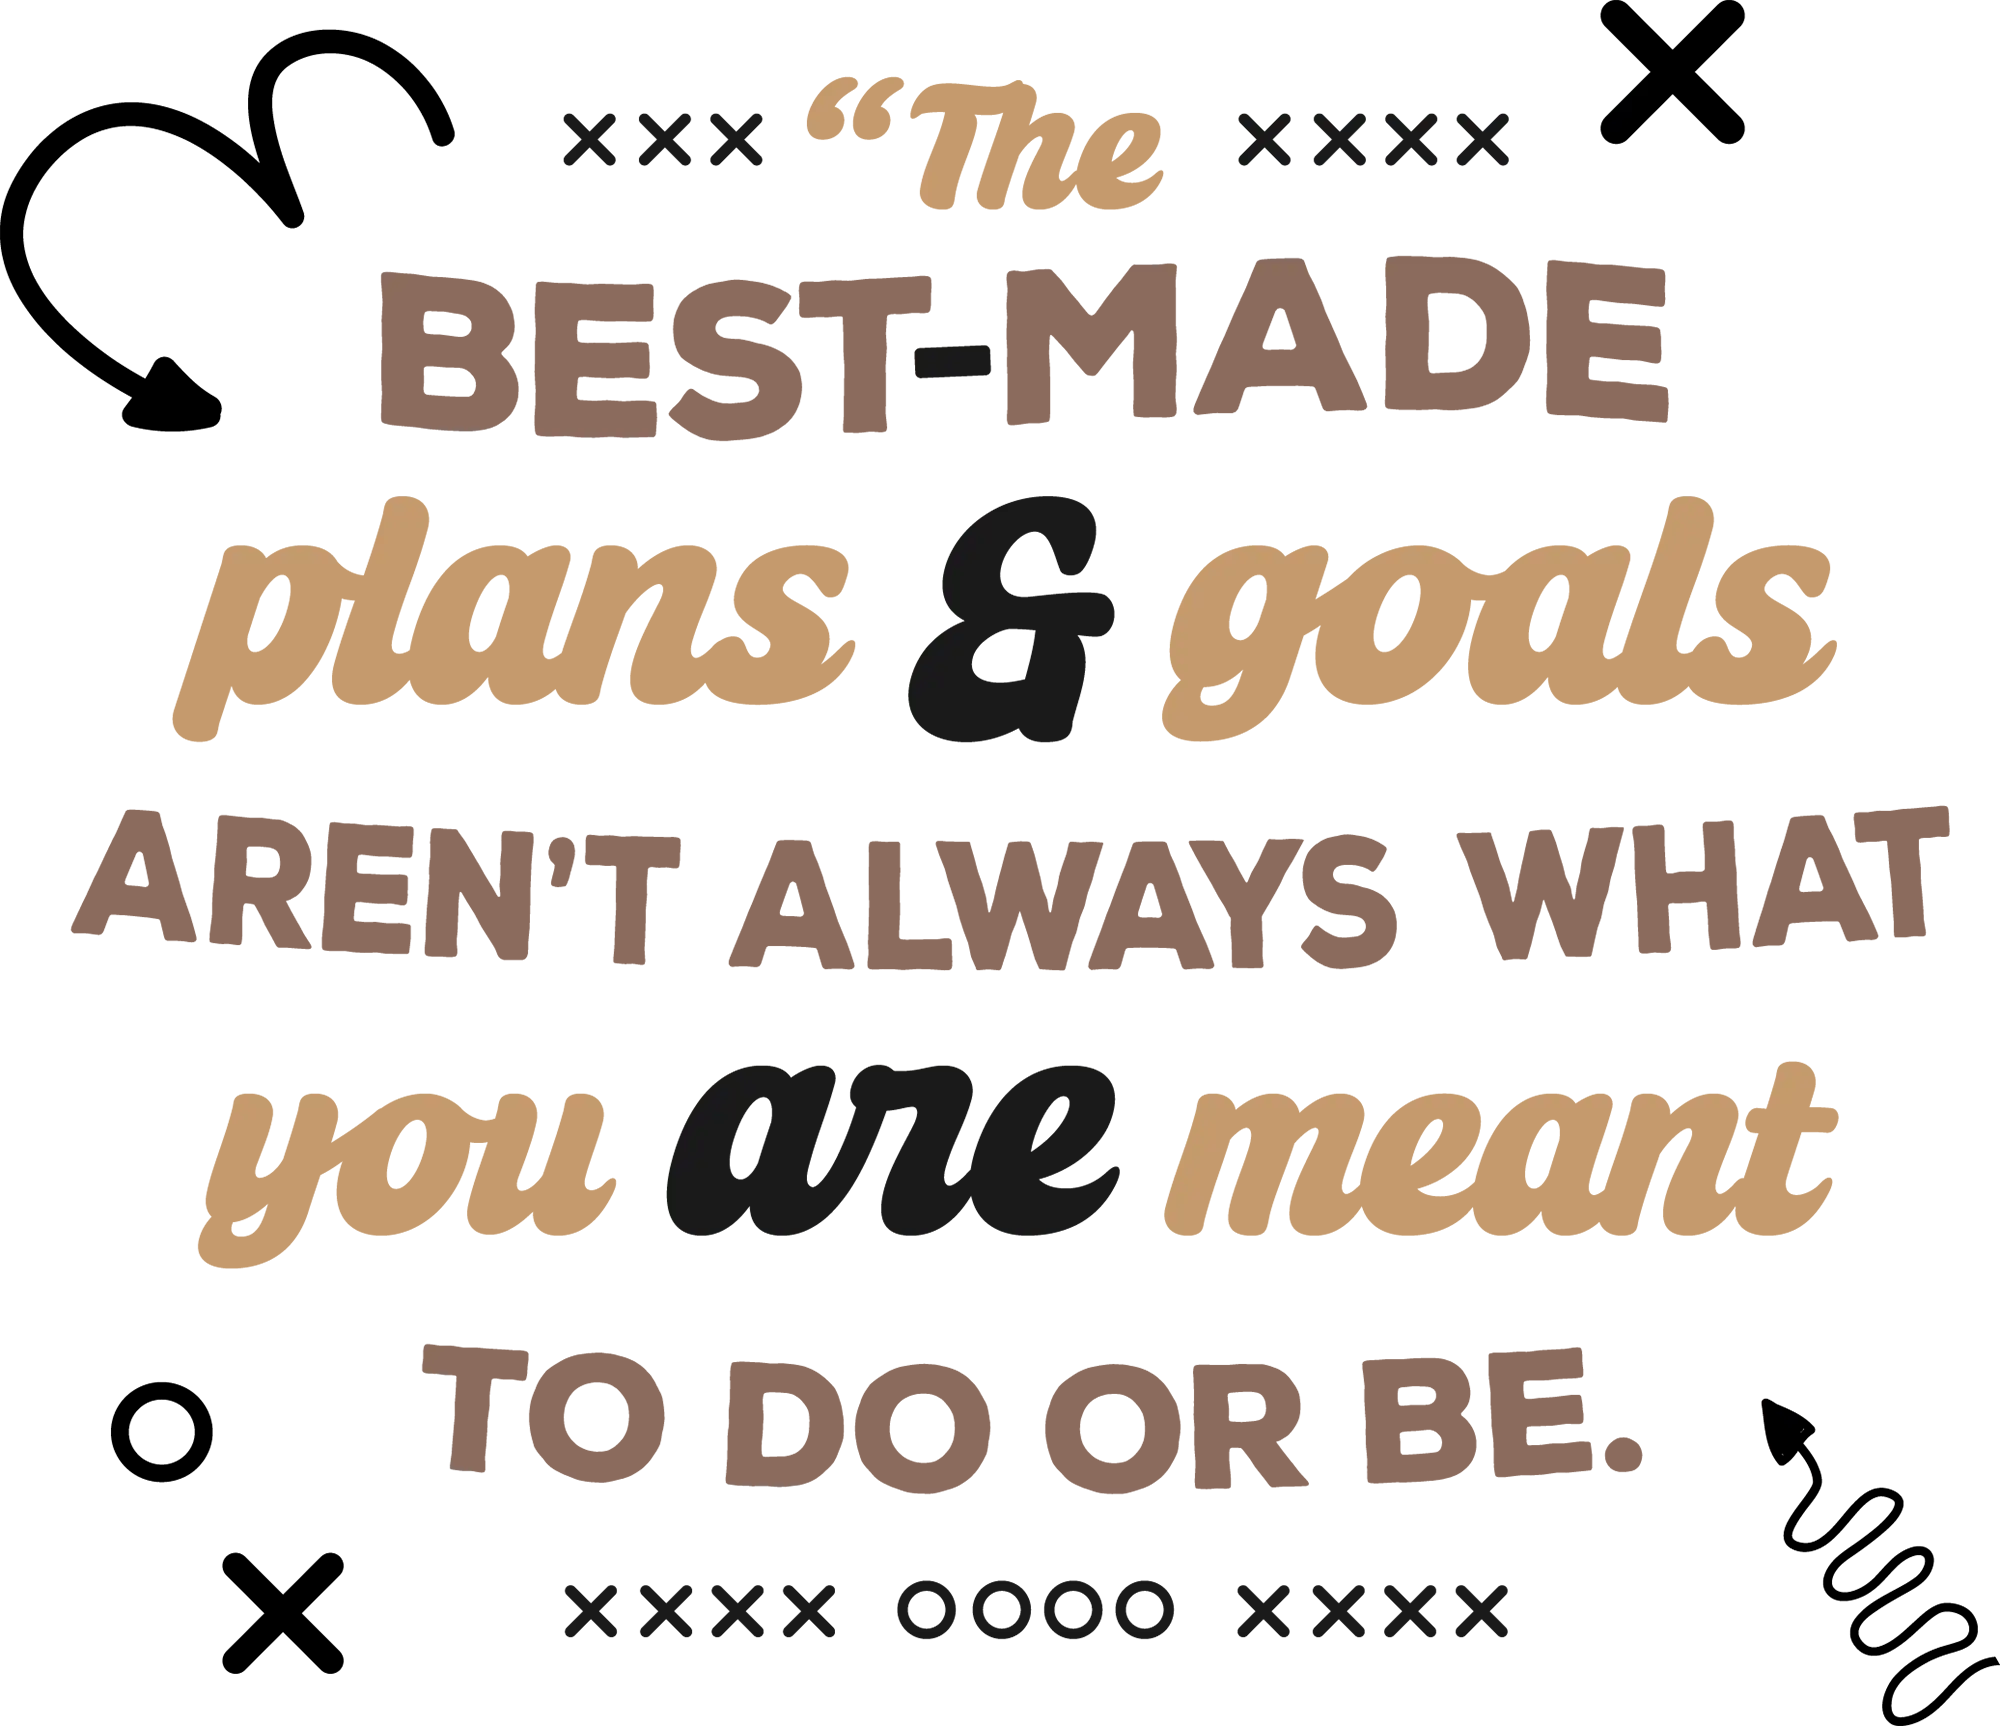 The best made plans and goals aren't always what you are meant to do or be.